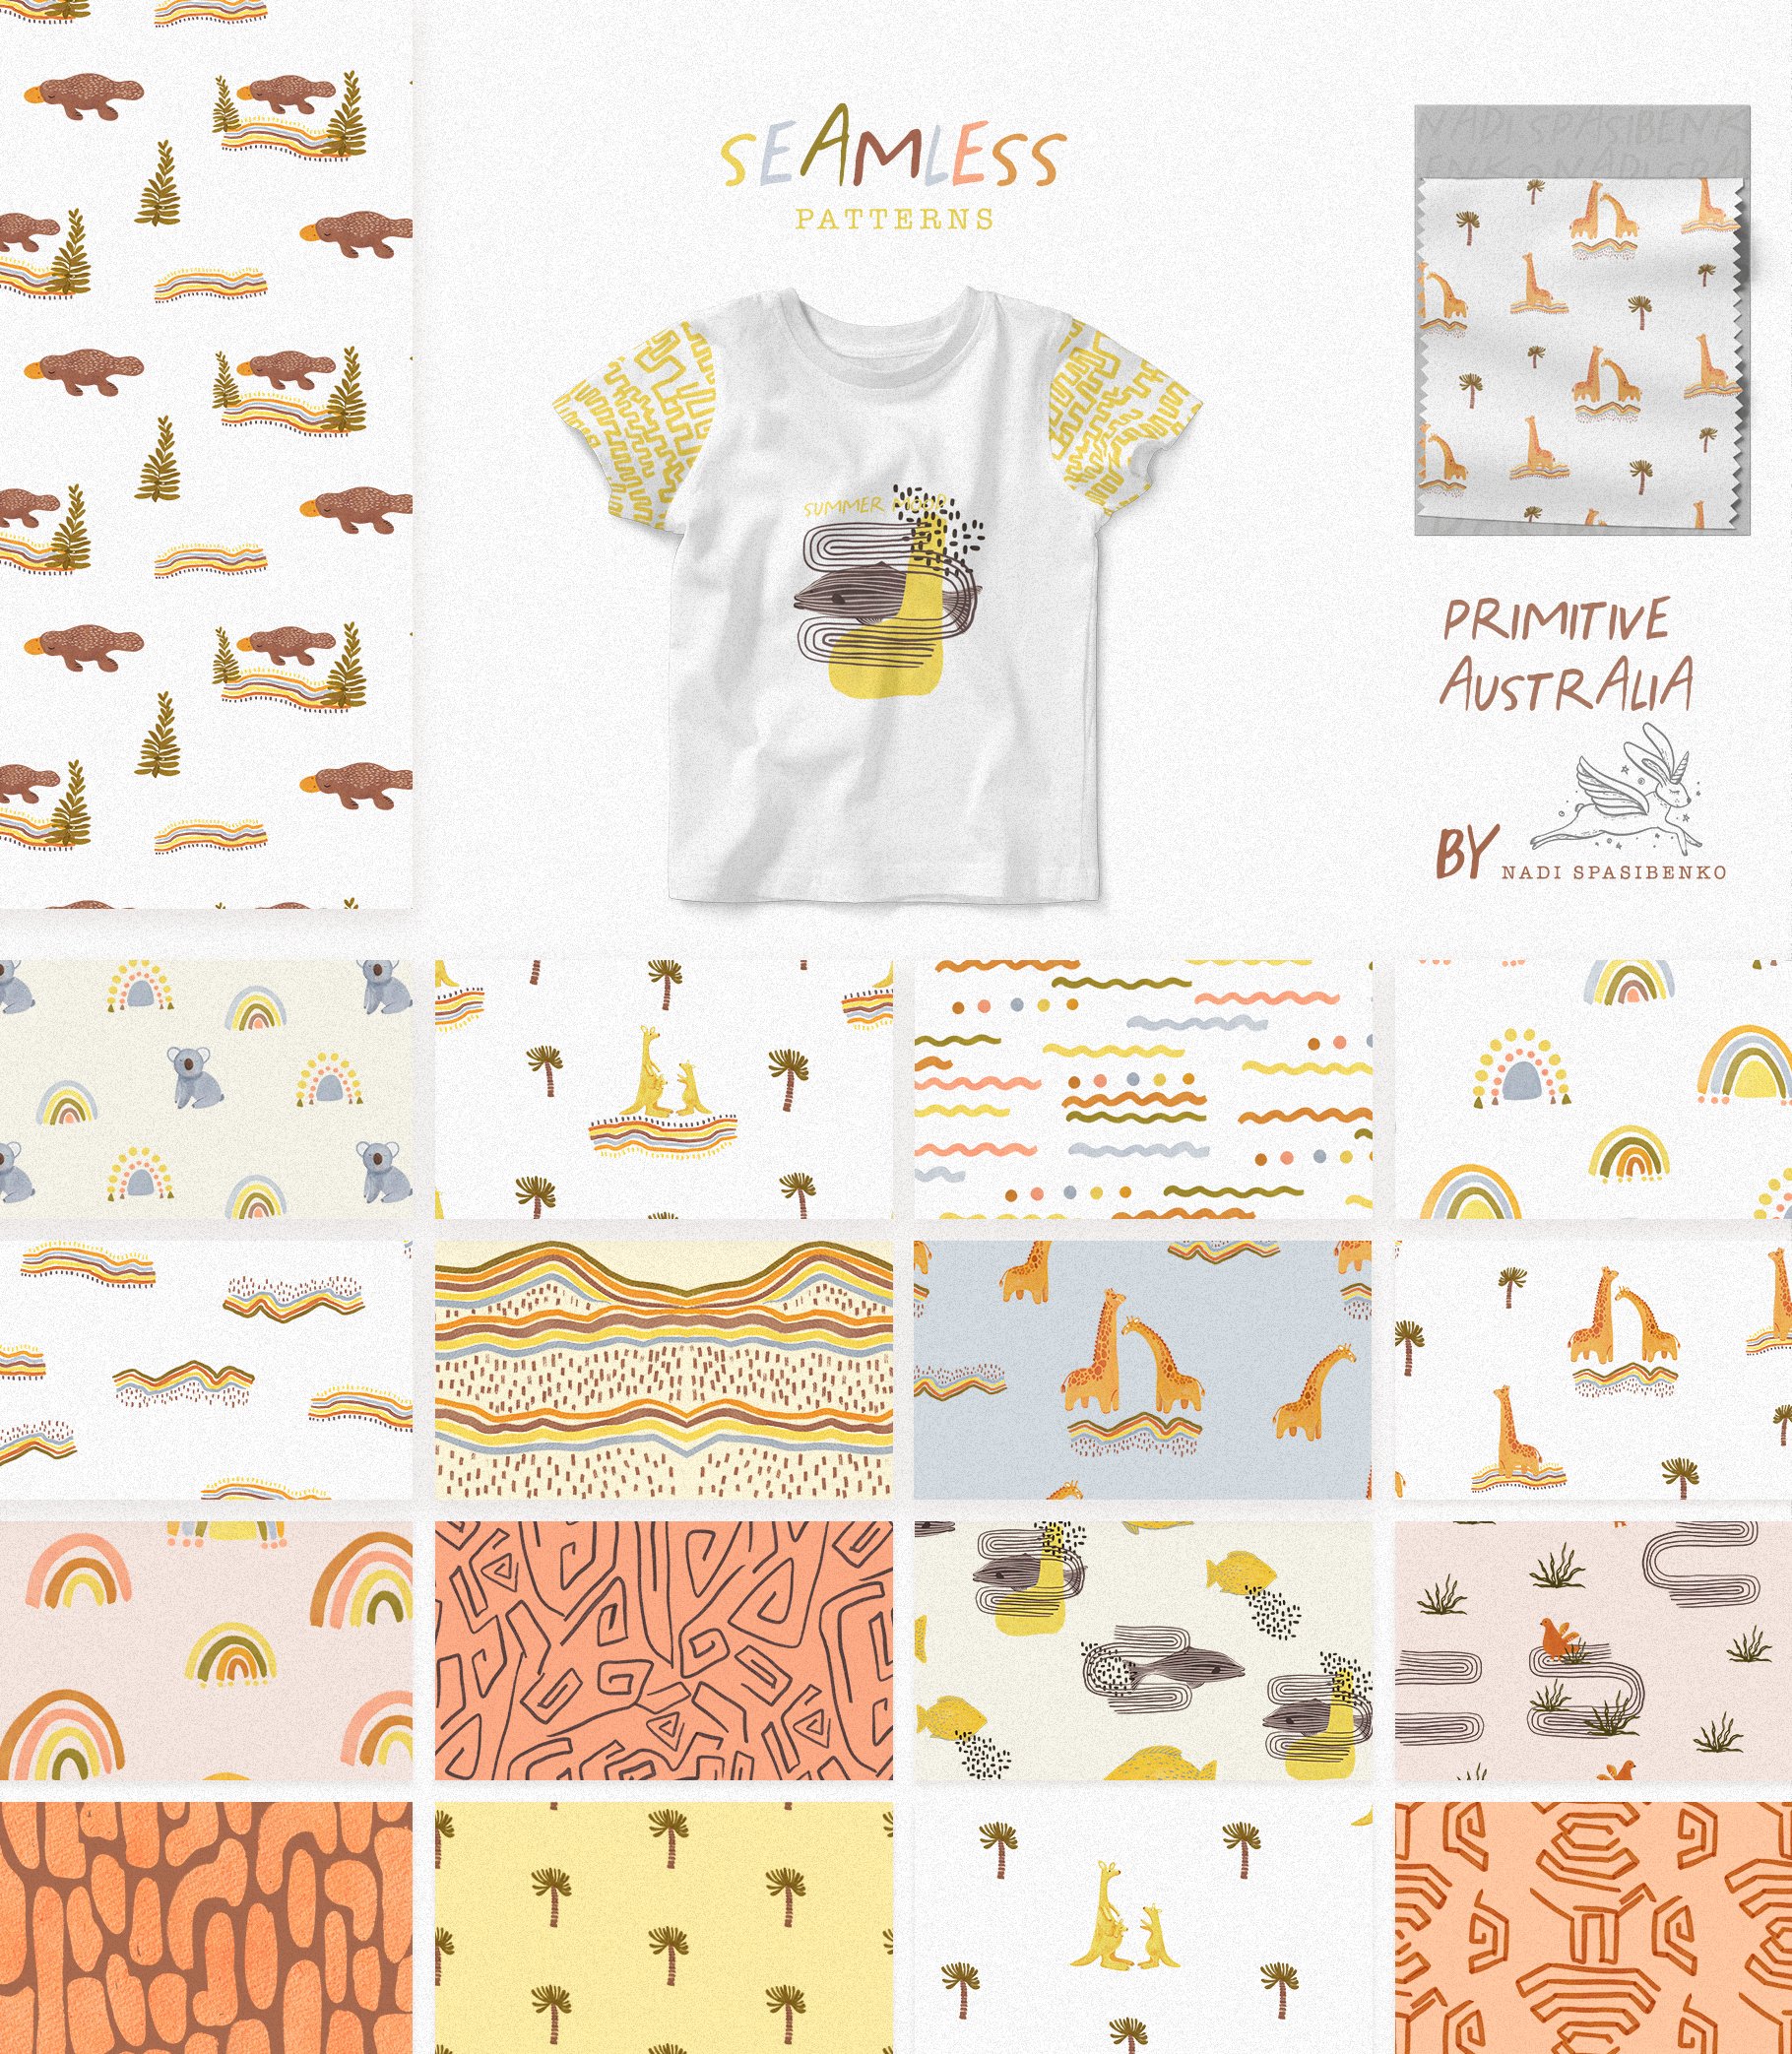 Some colorful patterns with the different animals and other prints.